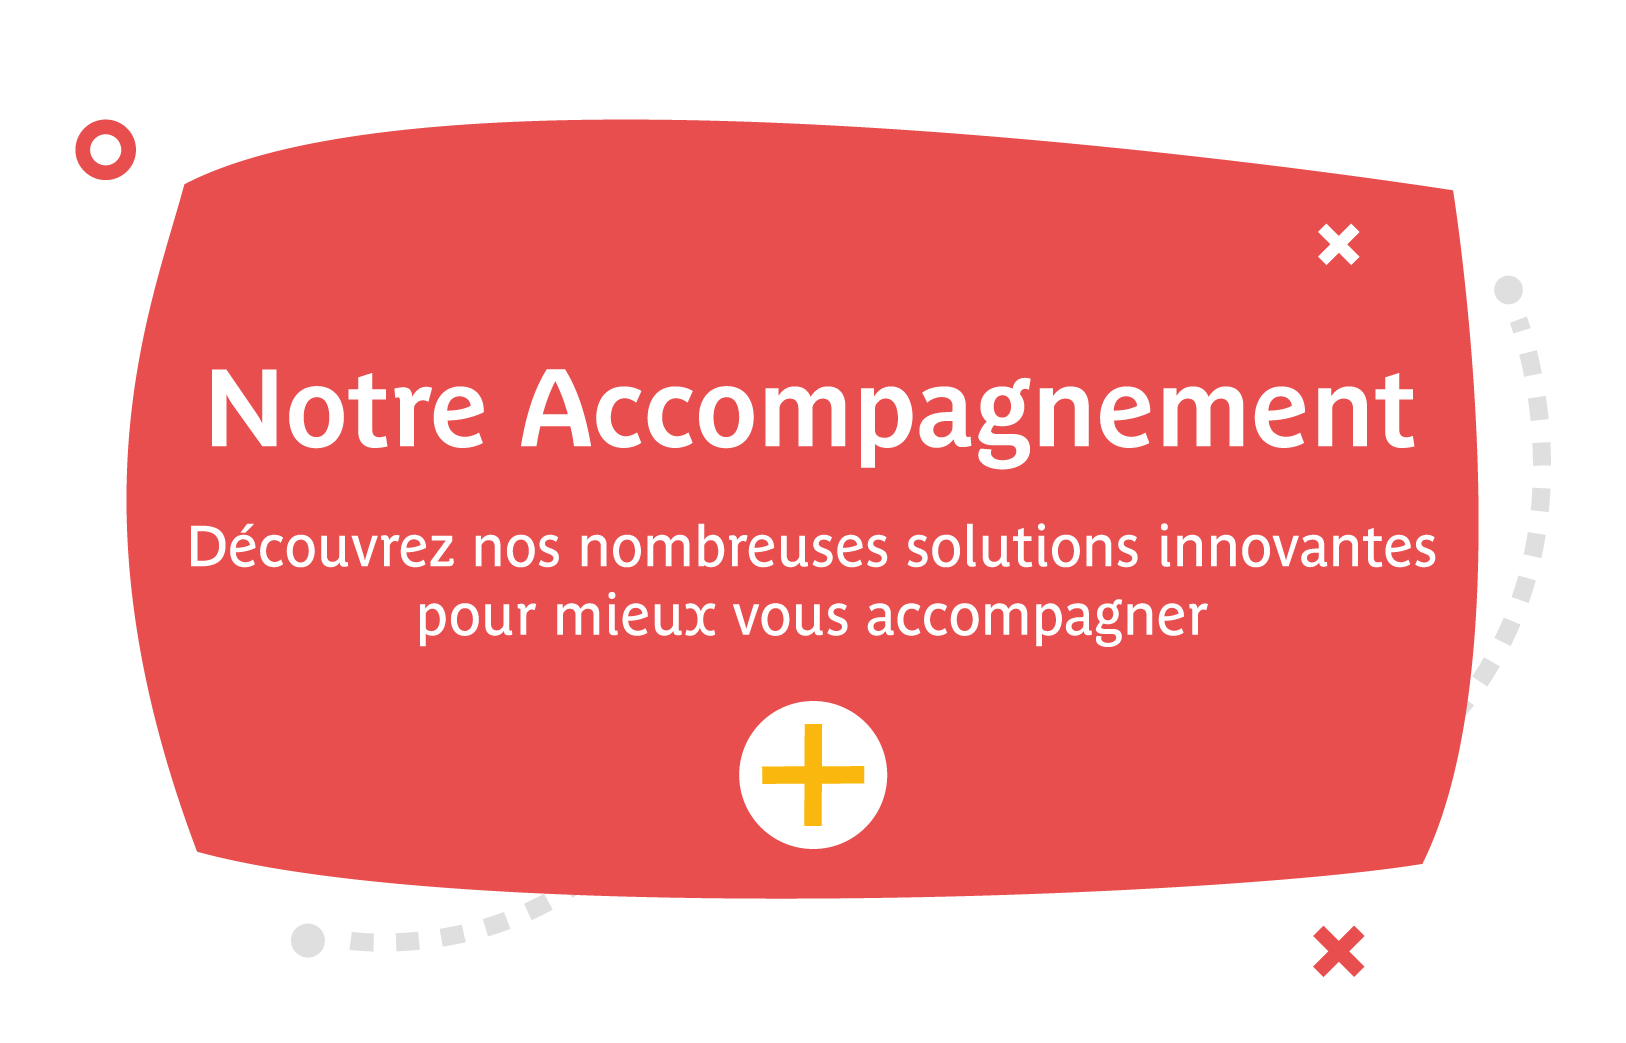 Notre Accompagnement